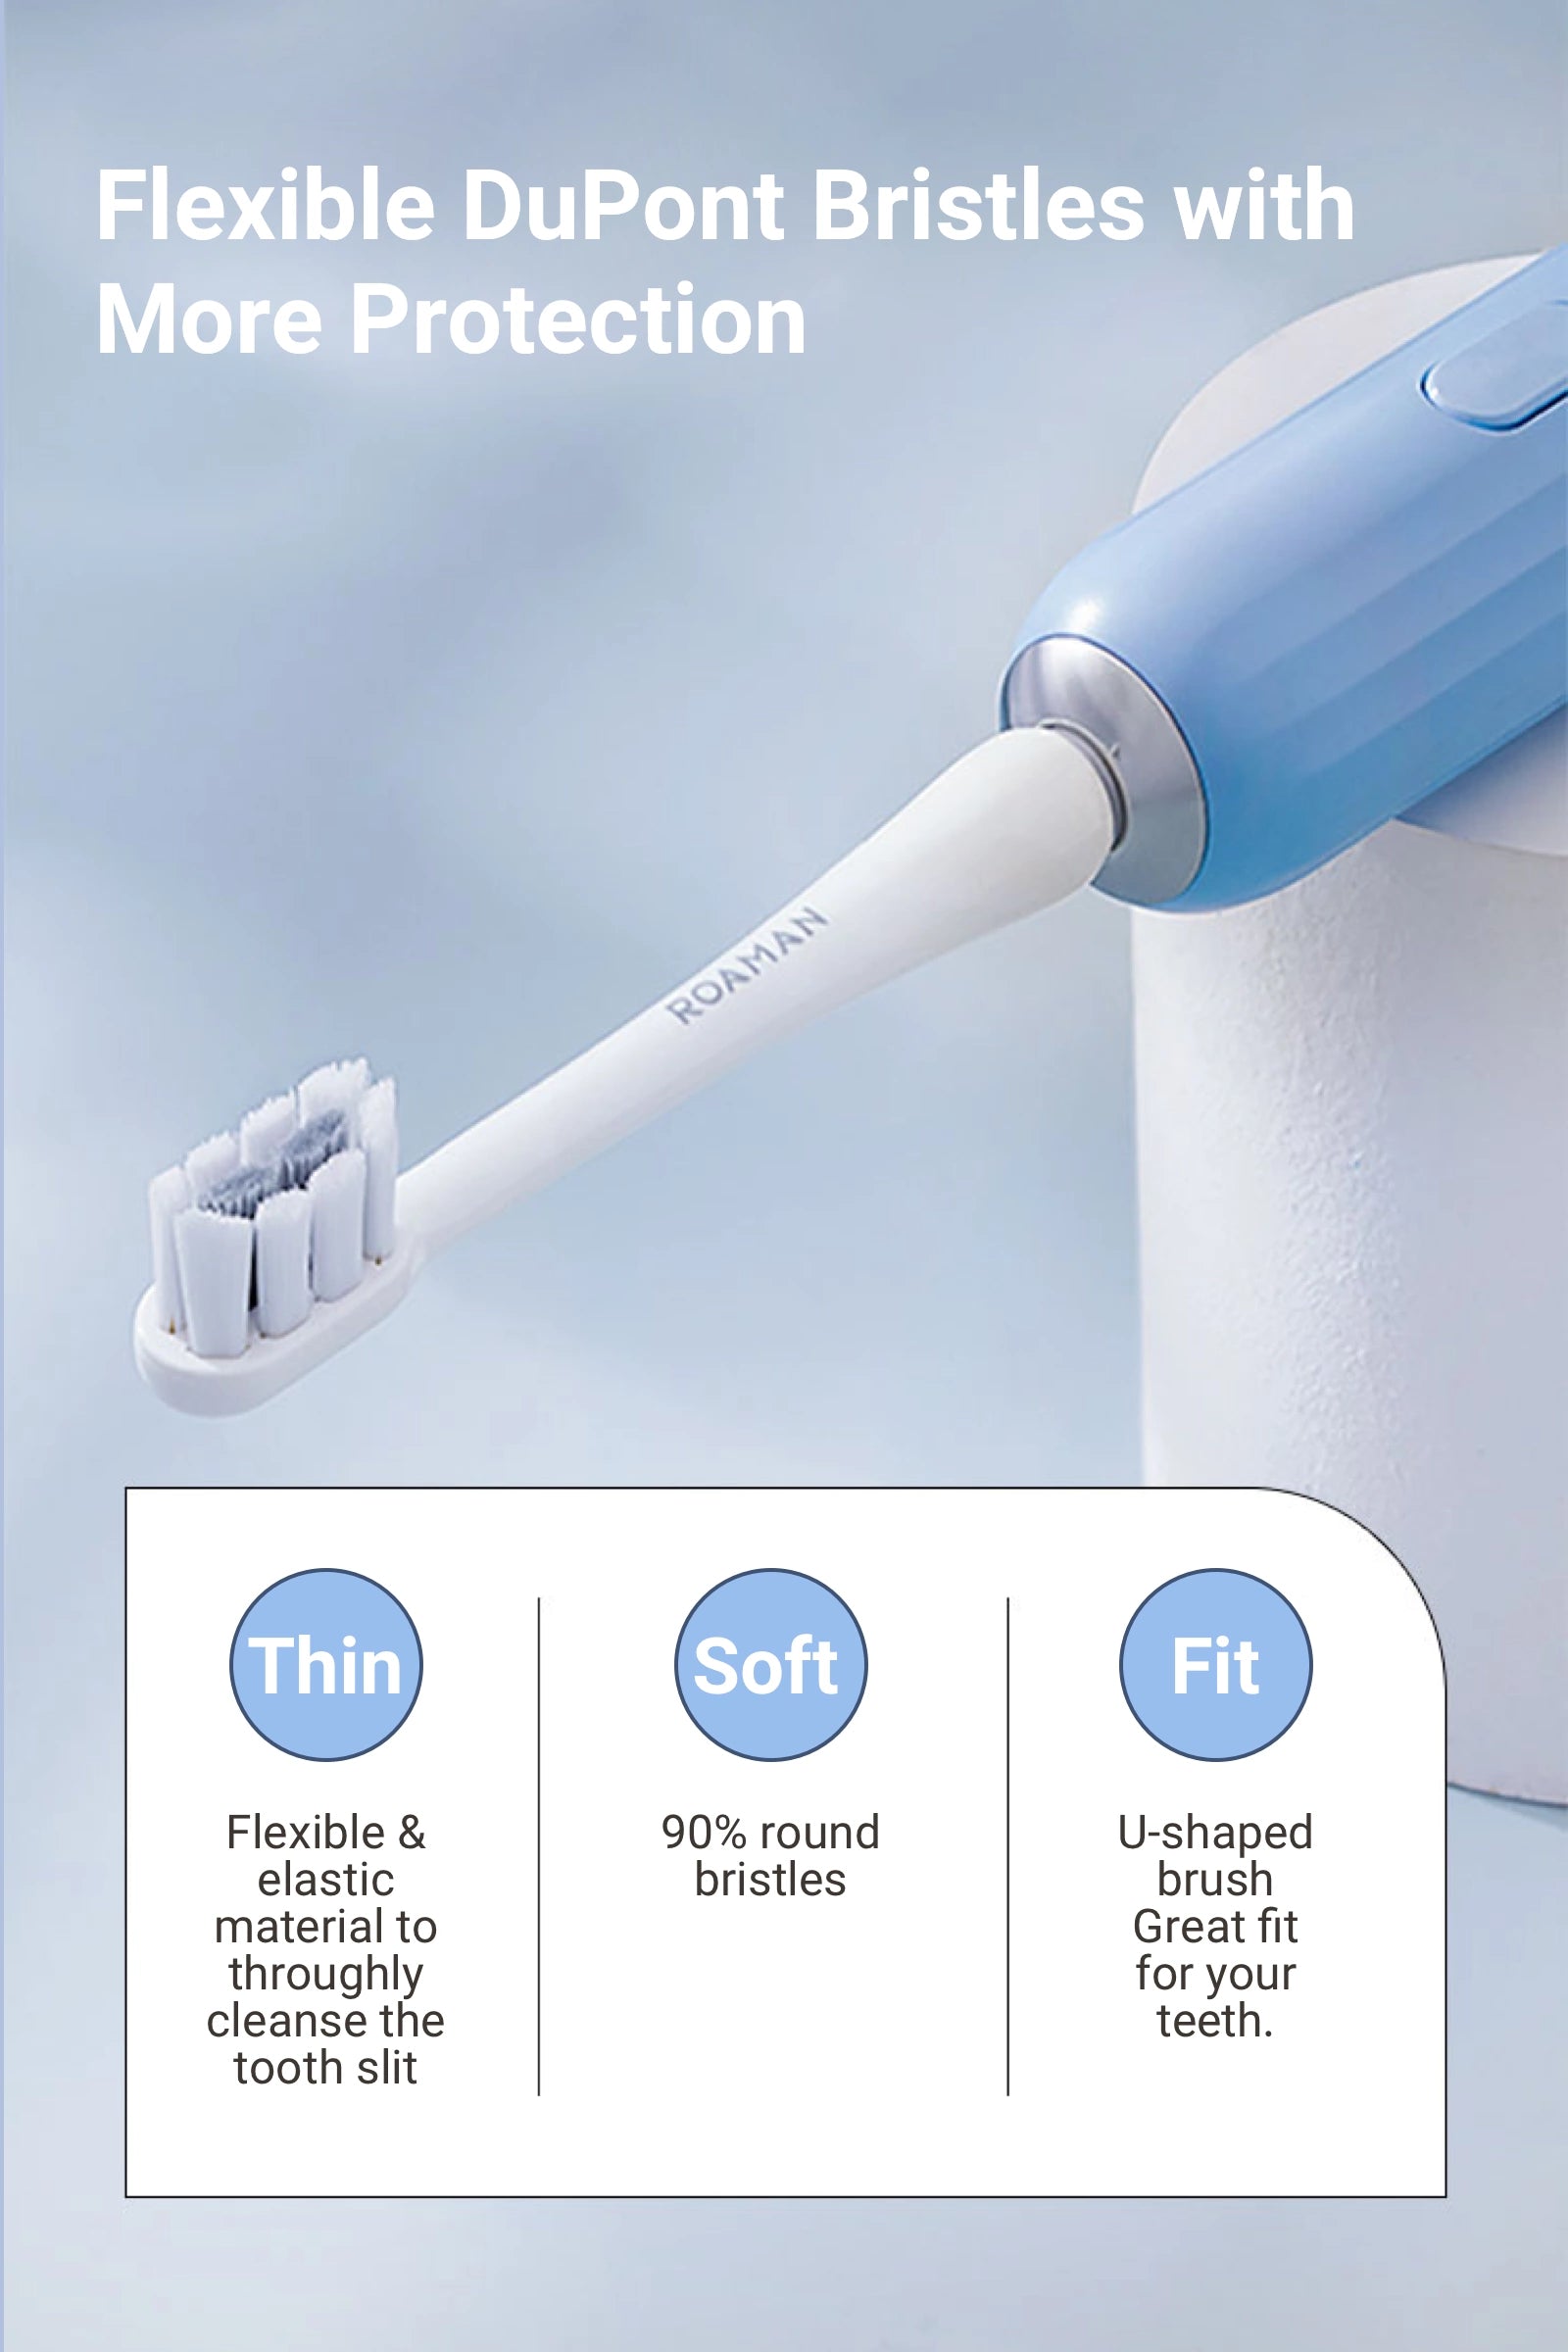 Flexible DuPont Bristles with More Protection   Thin Flexible & elastic material to throughly cleanse the tooth slit   Soft 90% round bristles.   Well-shaped  U-shaped brush. Great fit for your teeth.